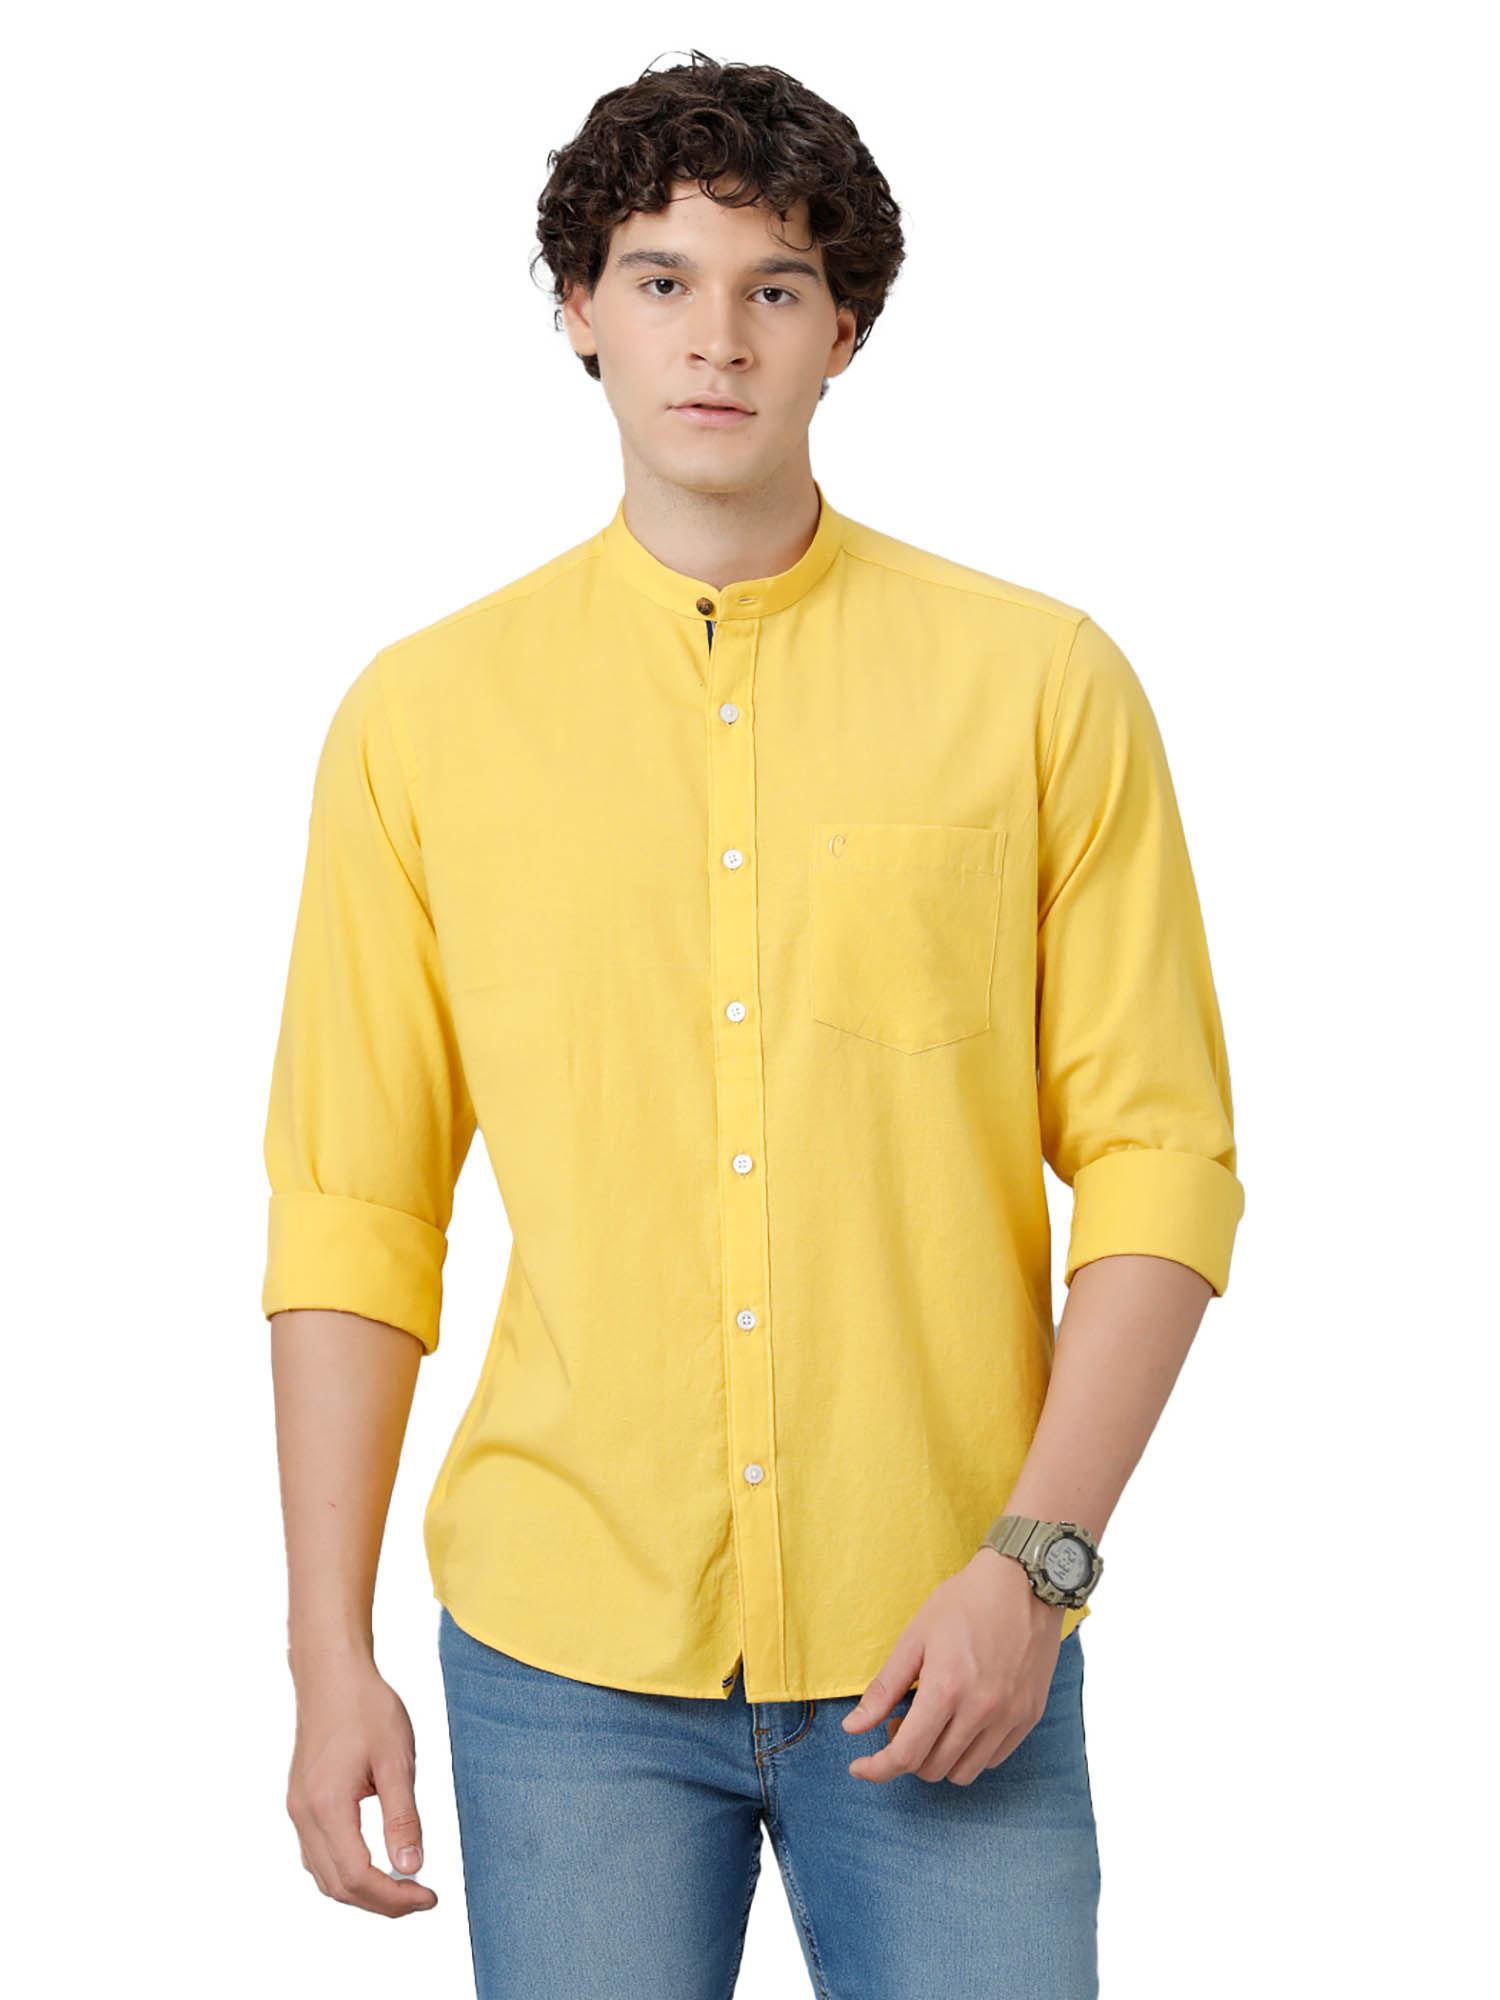 men's-cotton-linen-yellow-solid-slim-fit-full-sleeve-casual-shirt